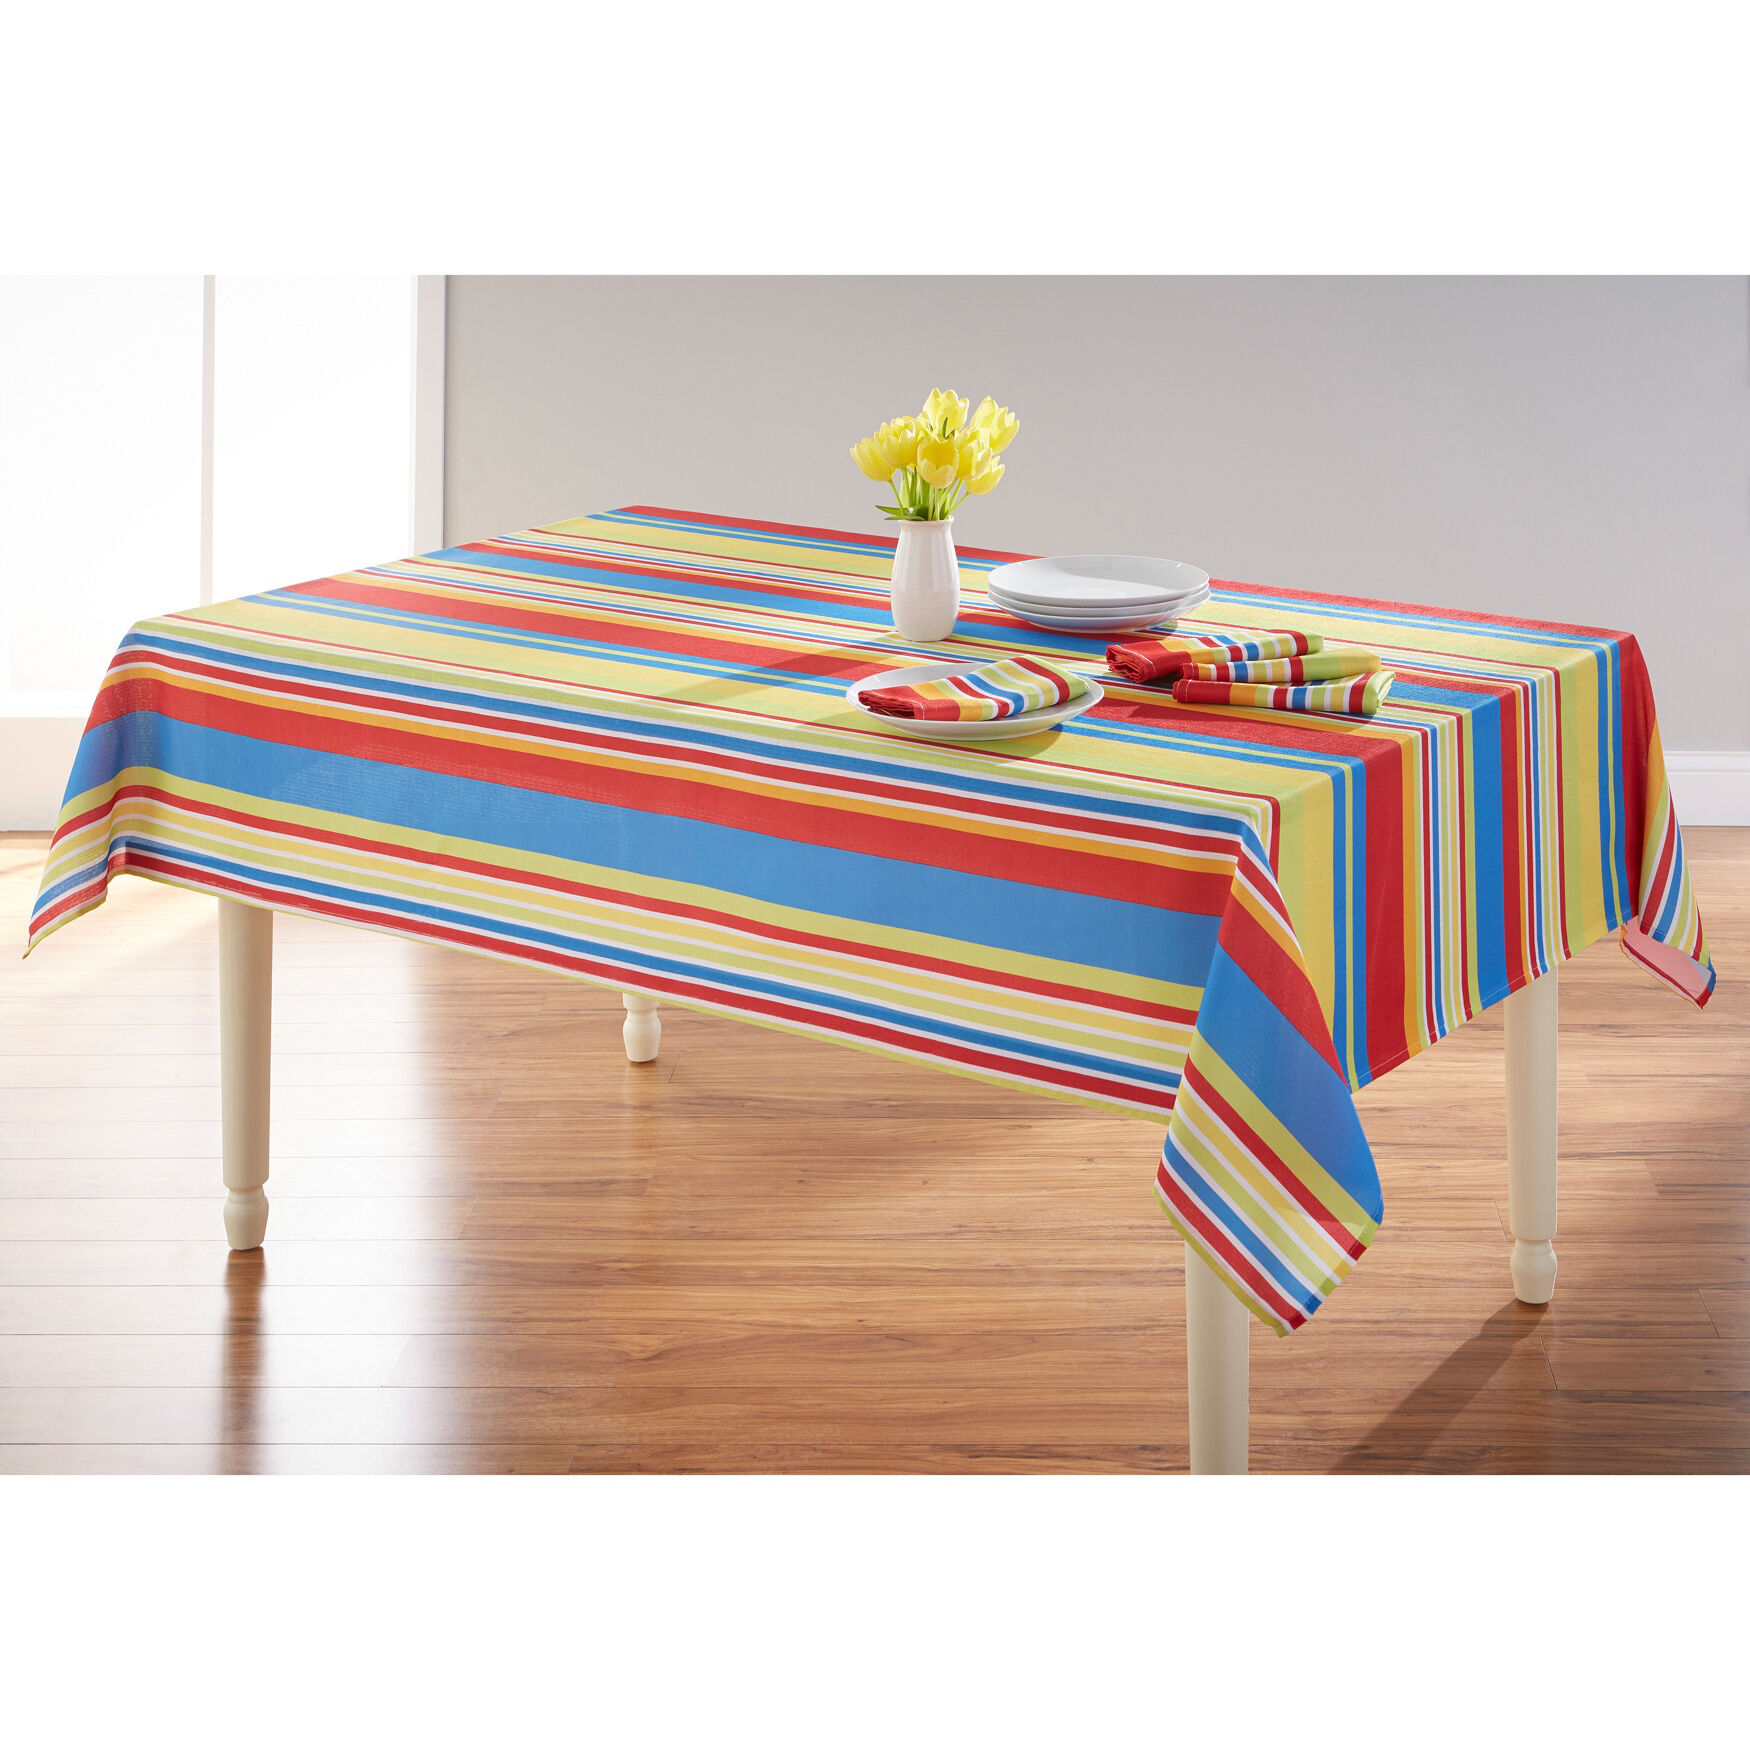 Tablecloth Checkered Style Polyester Table Cloth Spillproof Wrinkle Resistant Sh 